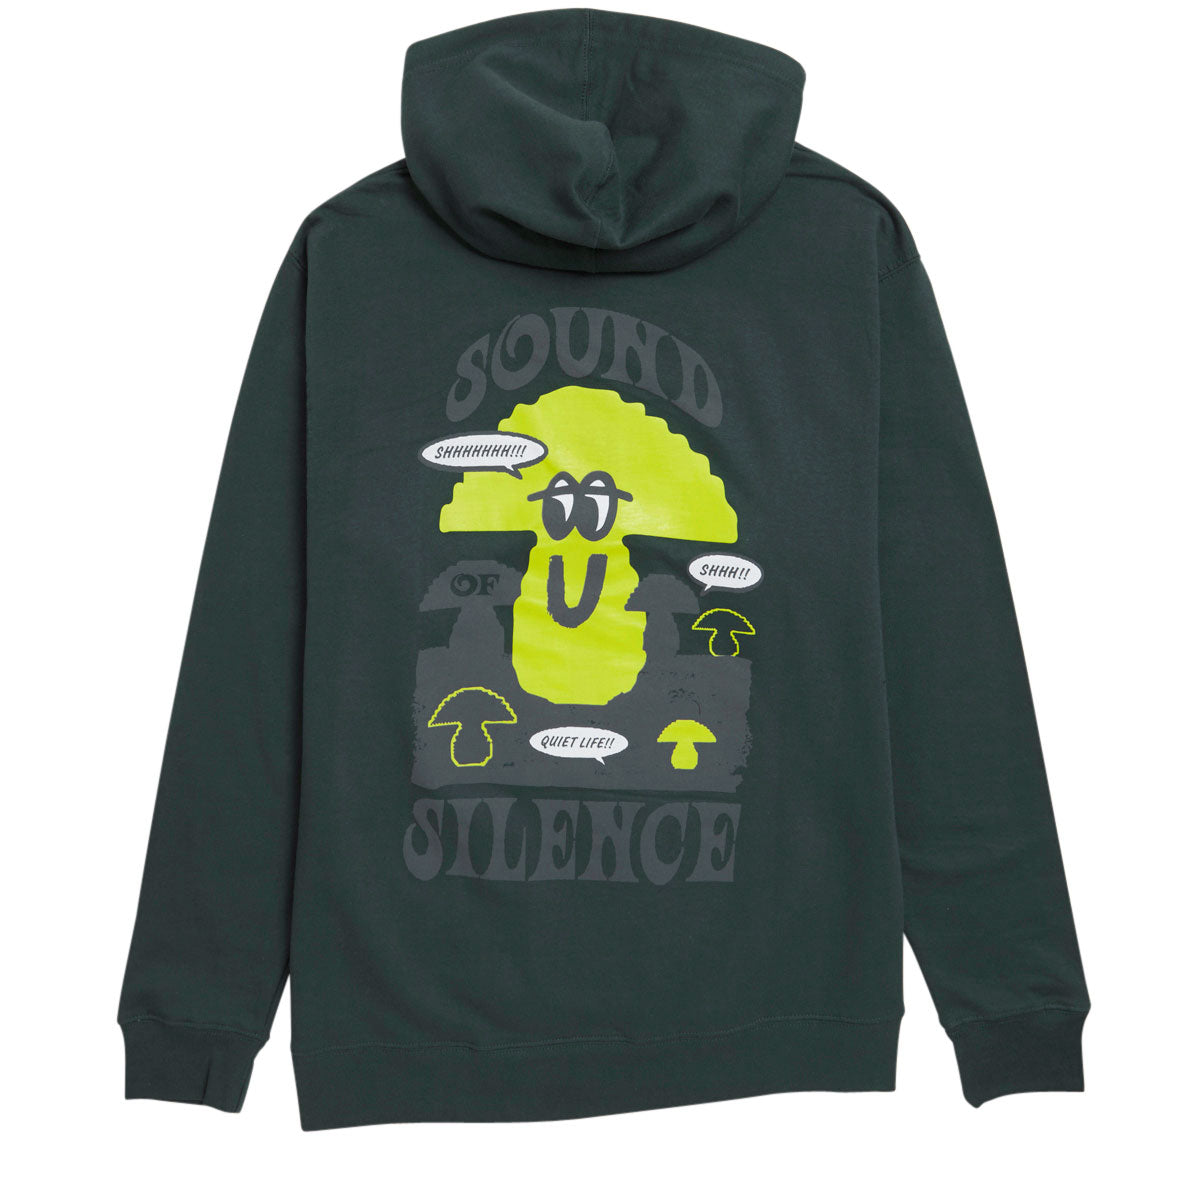 The Quiet Life Sound of Silence Hoodie - Hunter Green image 1